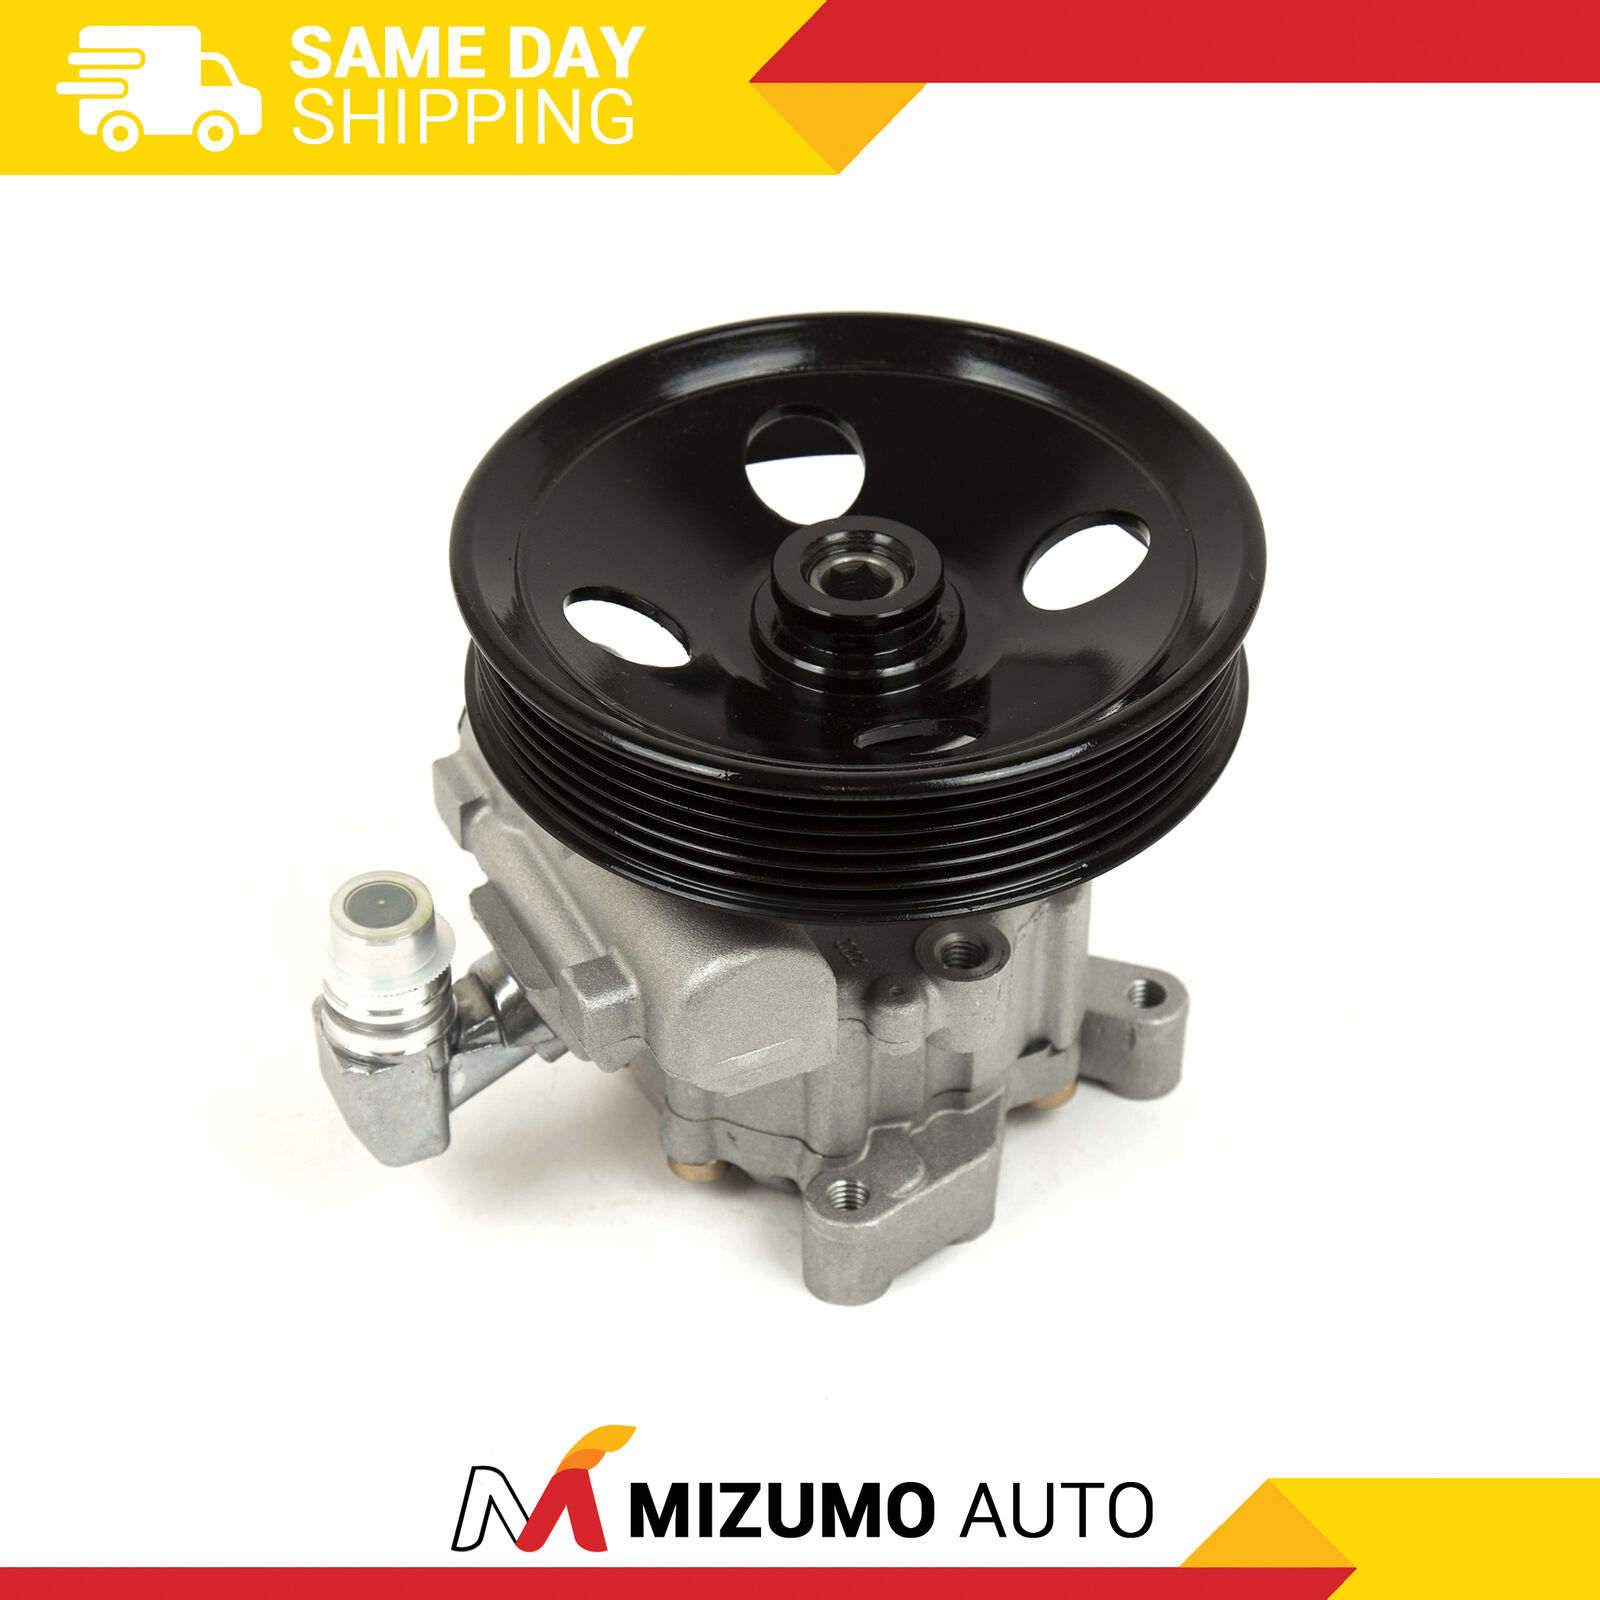 Power Steering Pump Fit 00-06 Mercedes-Benz S430 S500 S55 AMG 21-5326